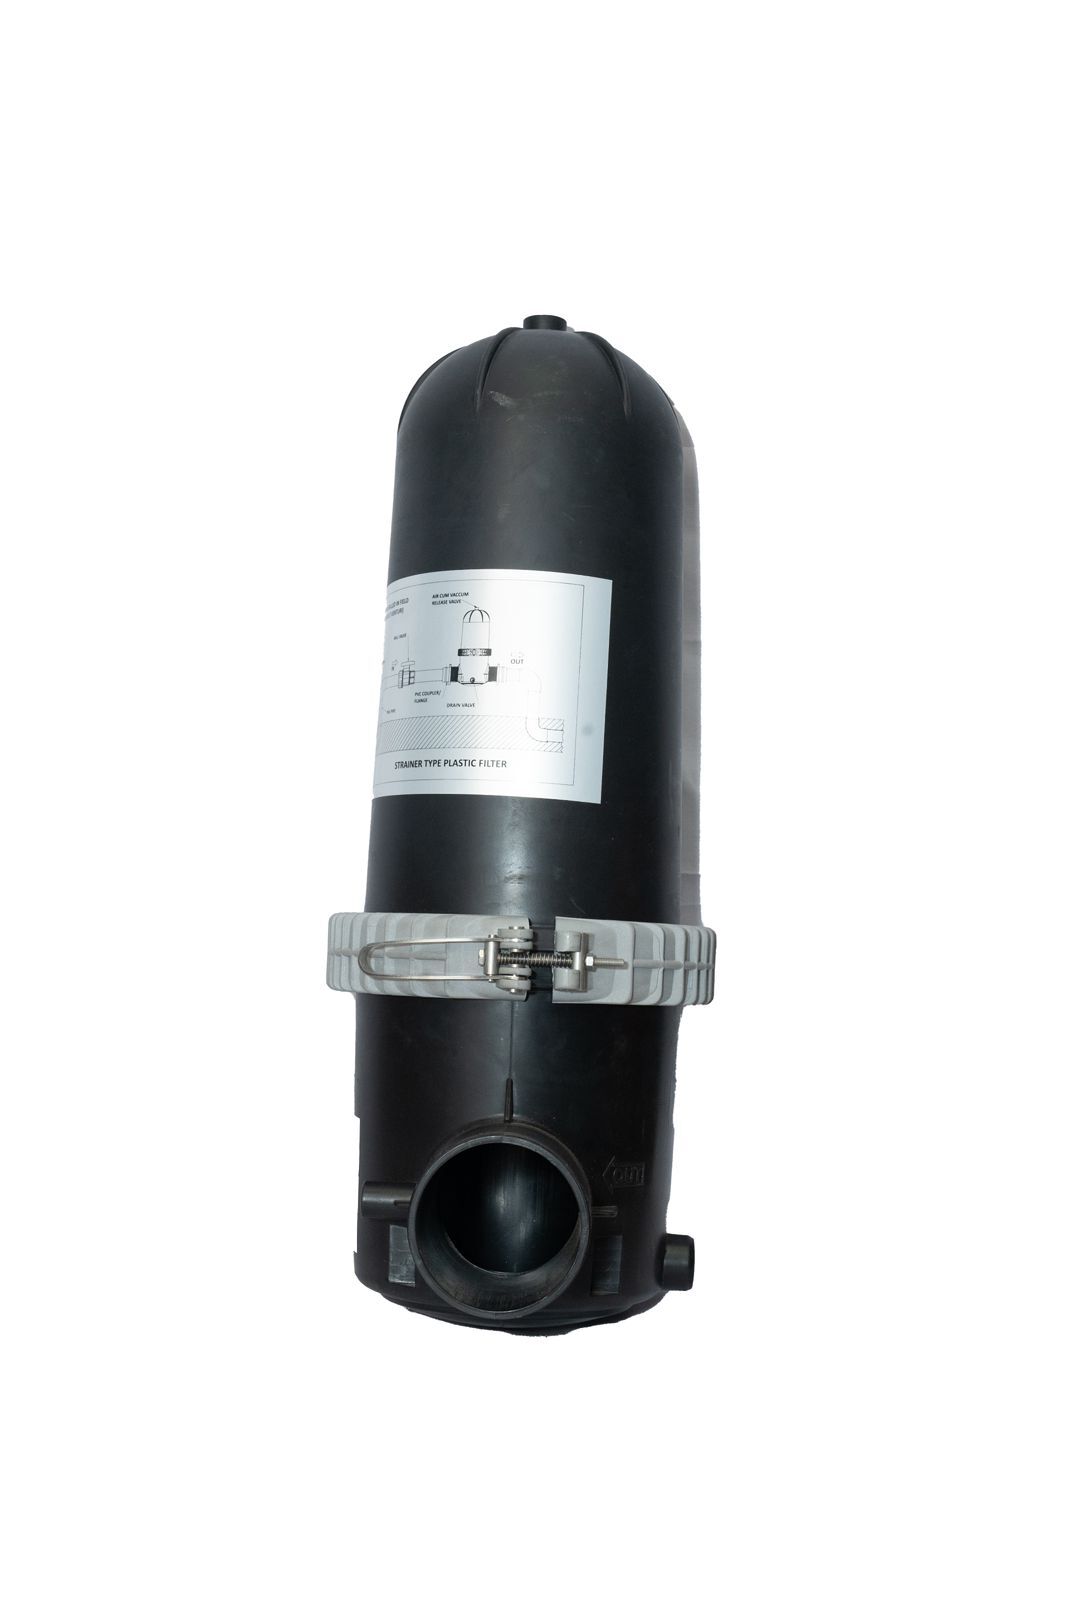 SHREE T-Type Super Size disc Filter